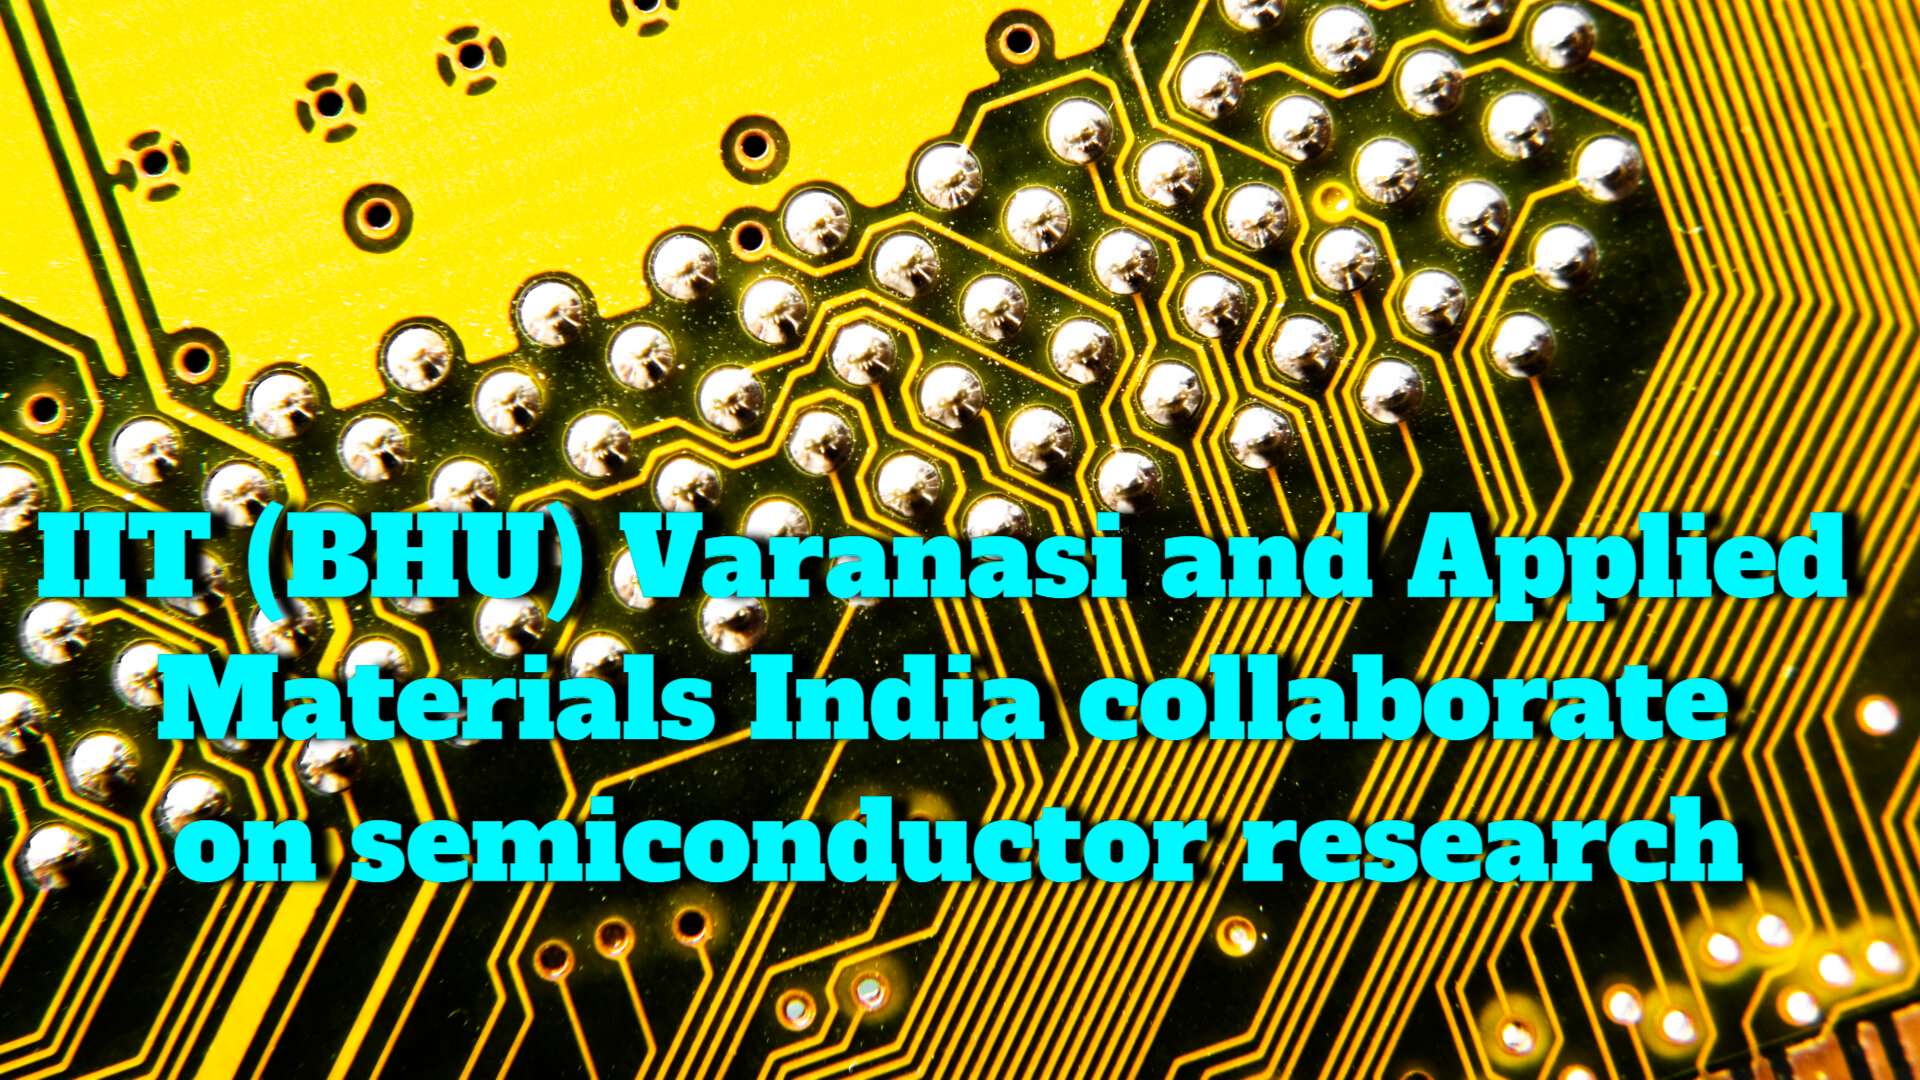 Applied Materials India and IIT (BHU) Varanasi collaborate on semiconductor research